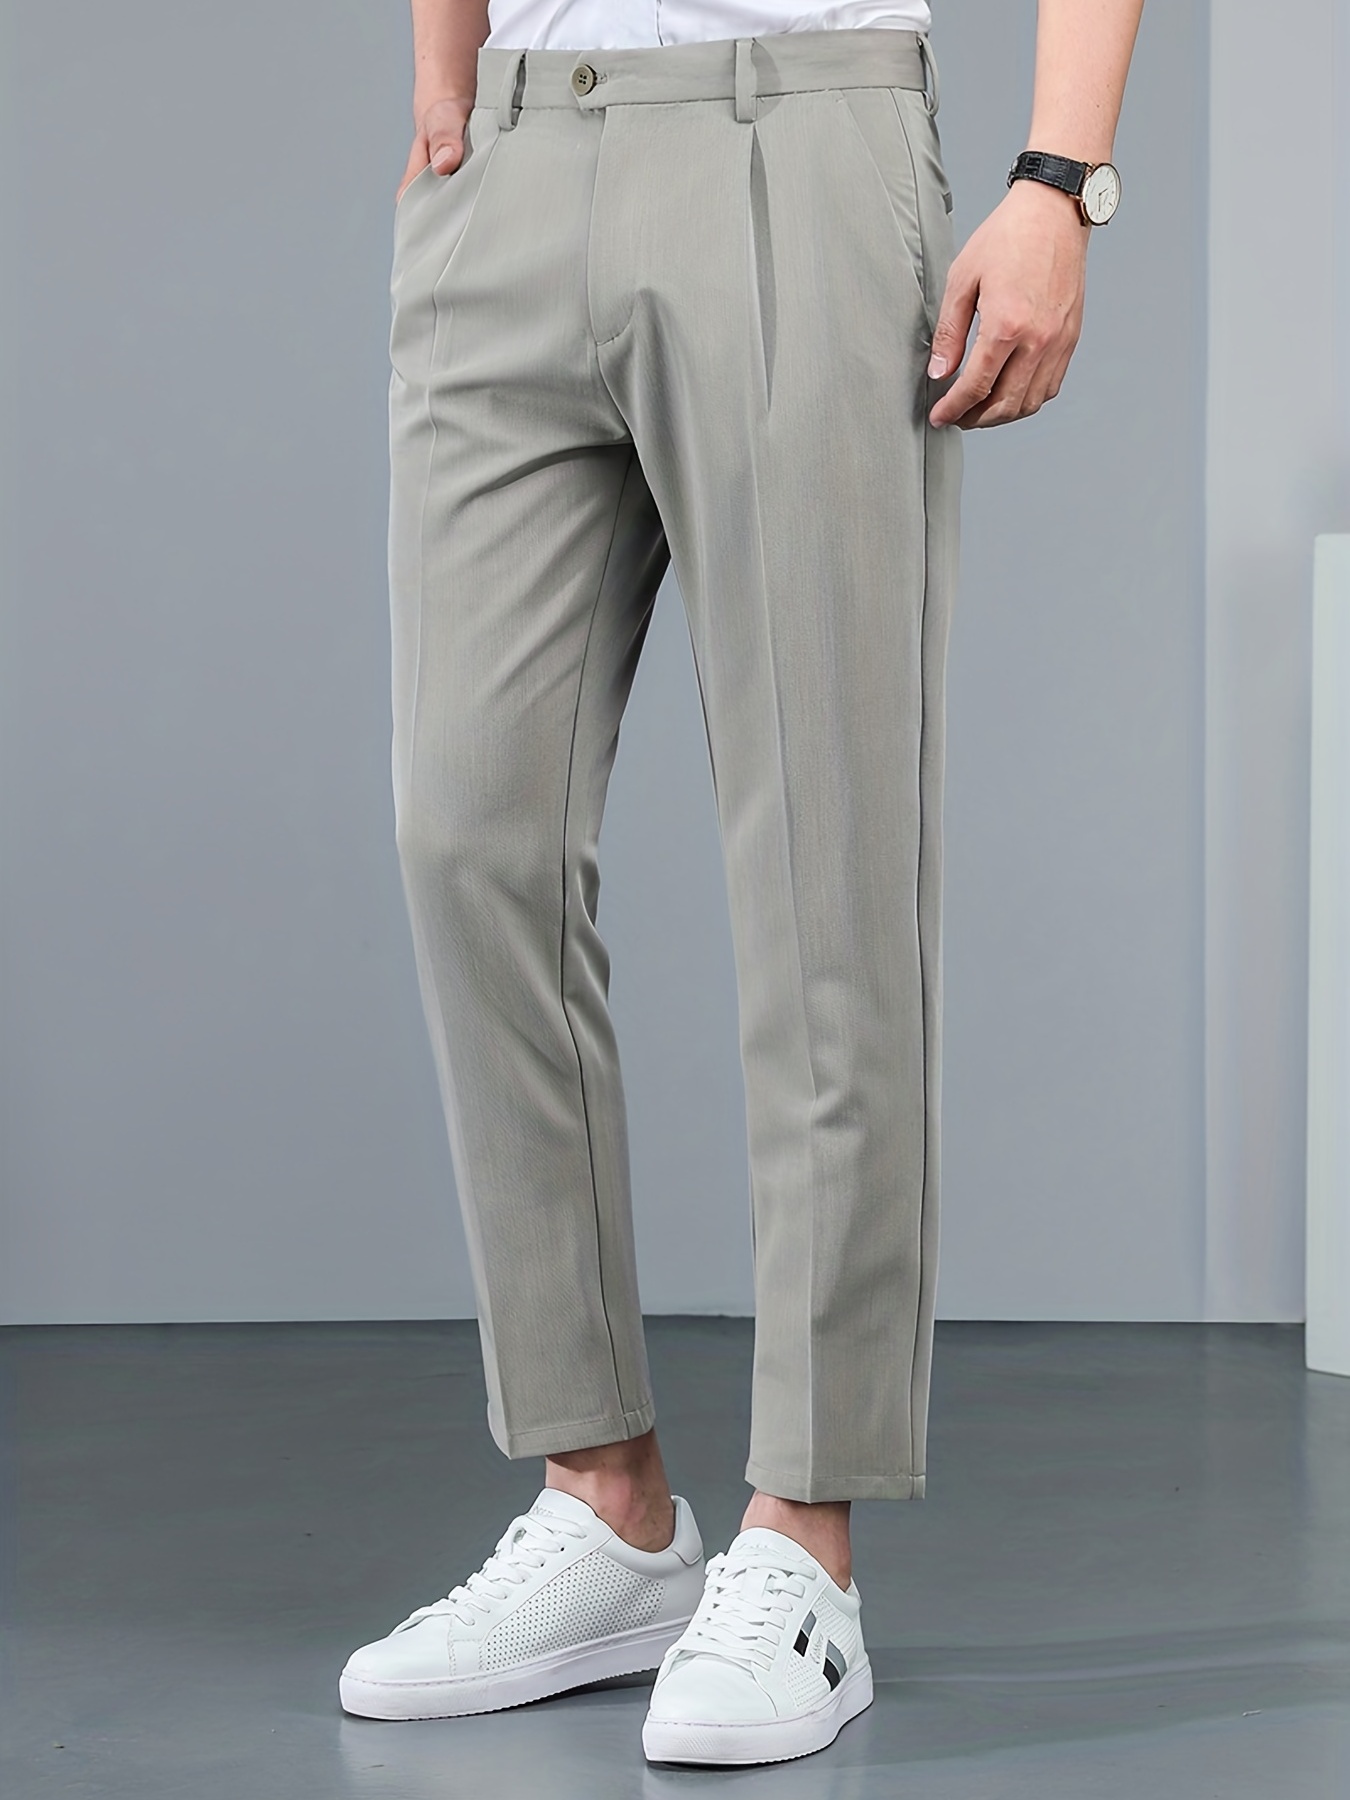 White/Gray Spring Pantalones Hombre Fashion Ankle Length Slim Fit